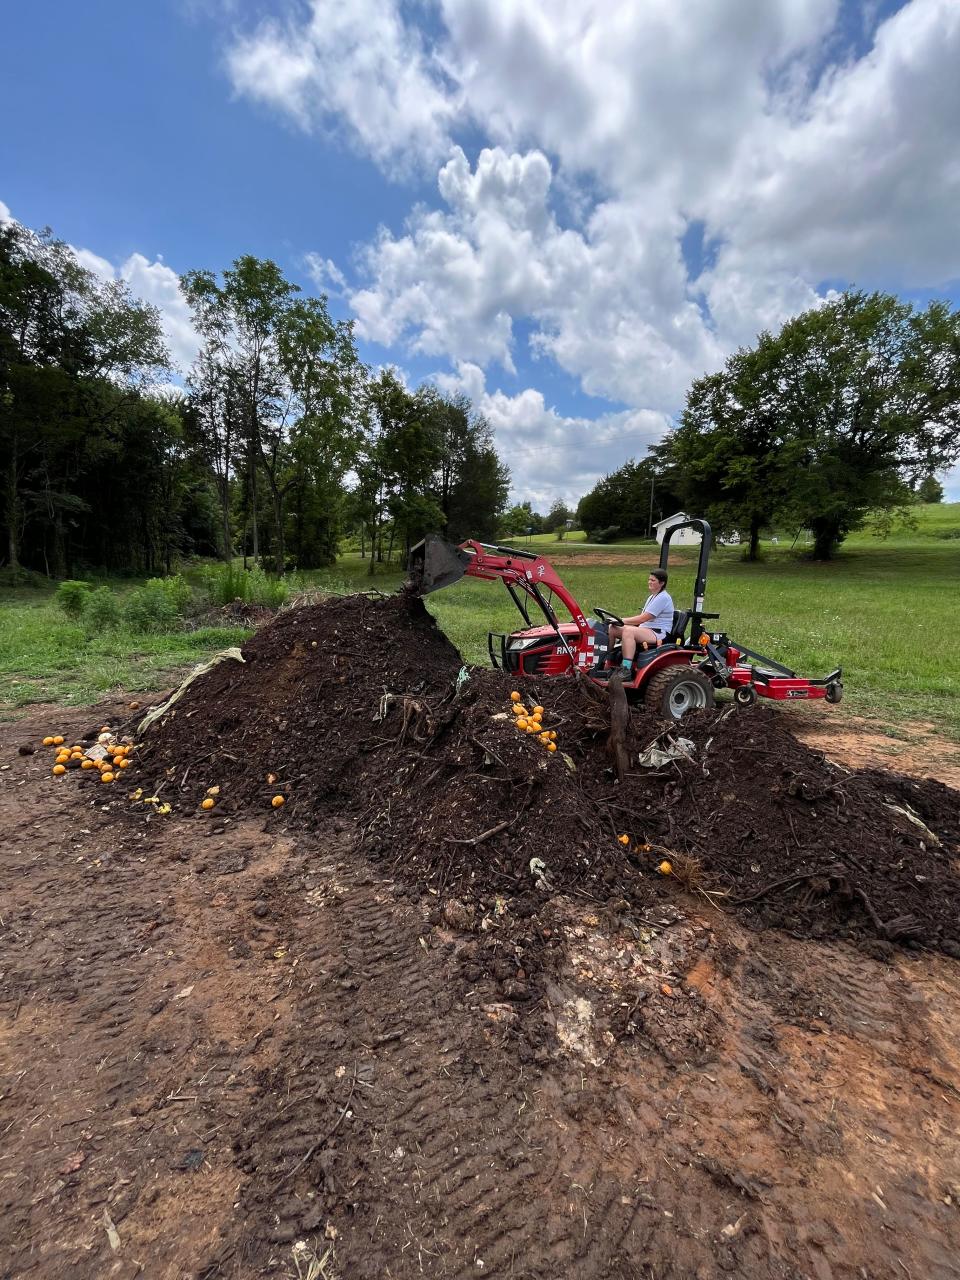 Green Heron Composting Service staff member Kelly Newby manages a compost pile at the company’s farm location in Madisonville, Tenn. 2021